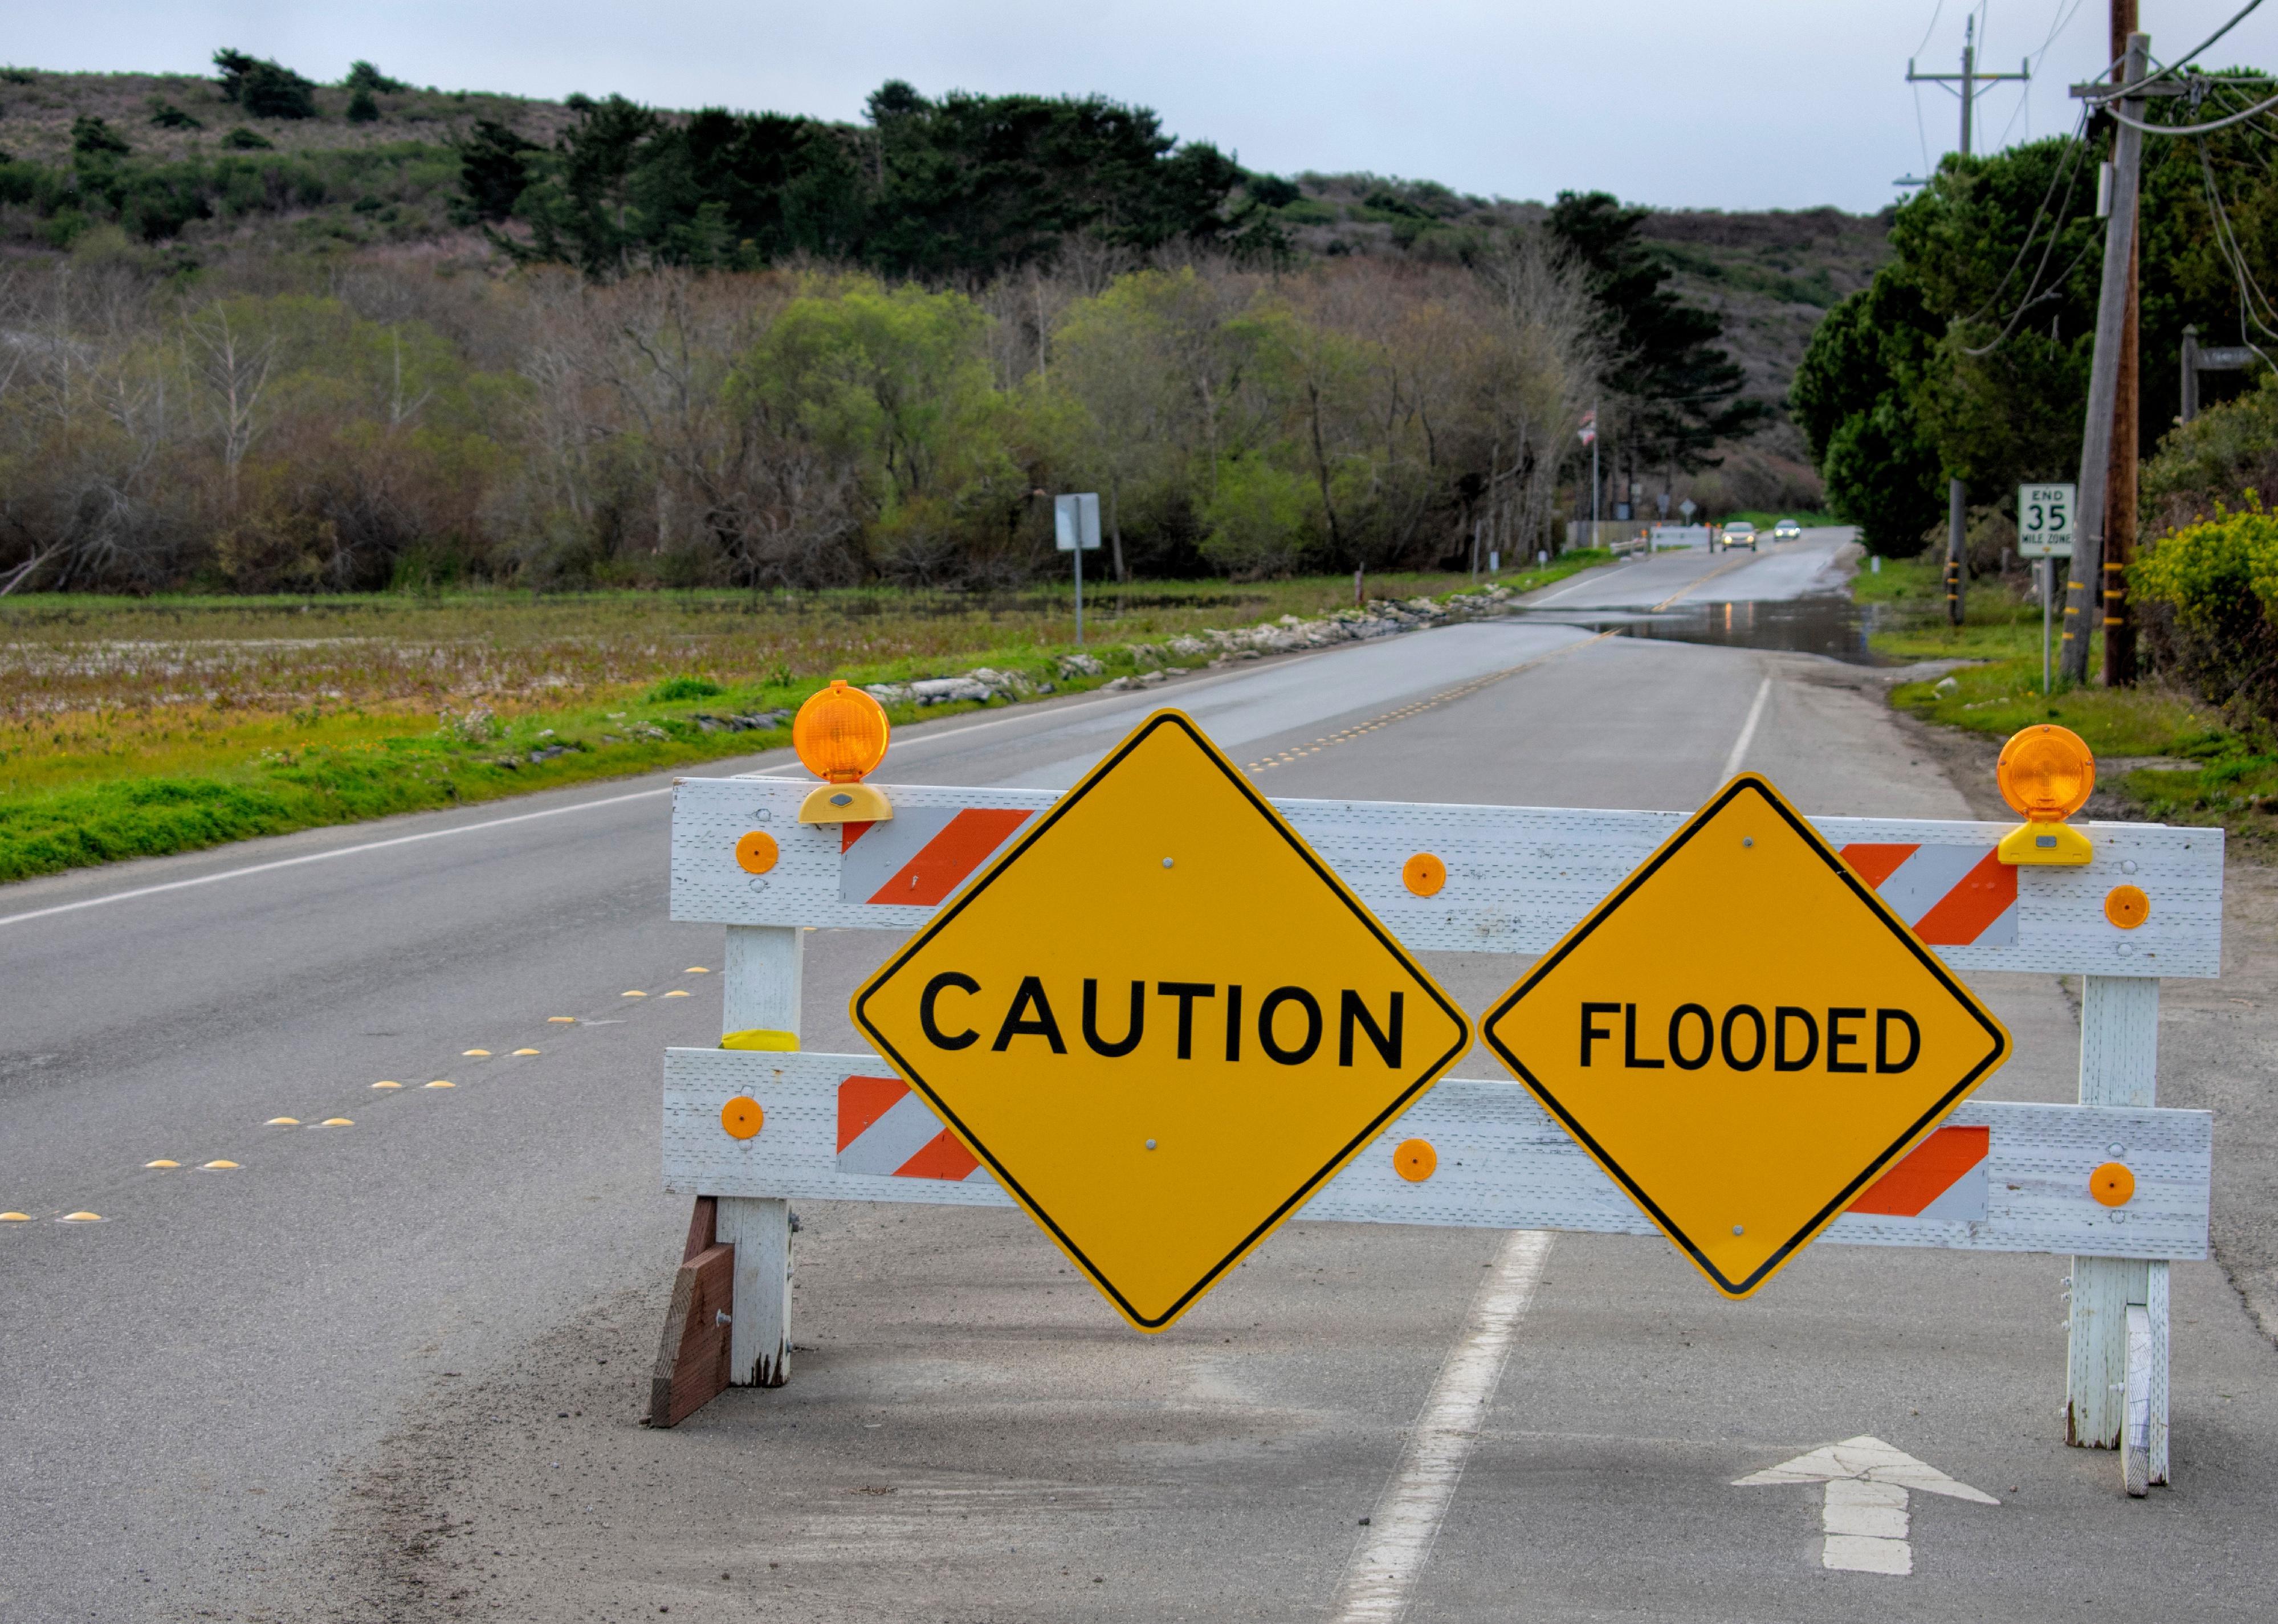 Yellow Caution and Flooded warning signs on barricade installed across two-way street.